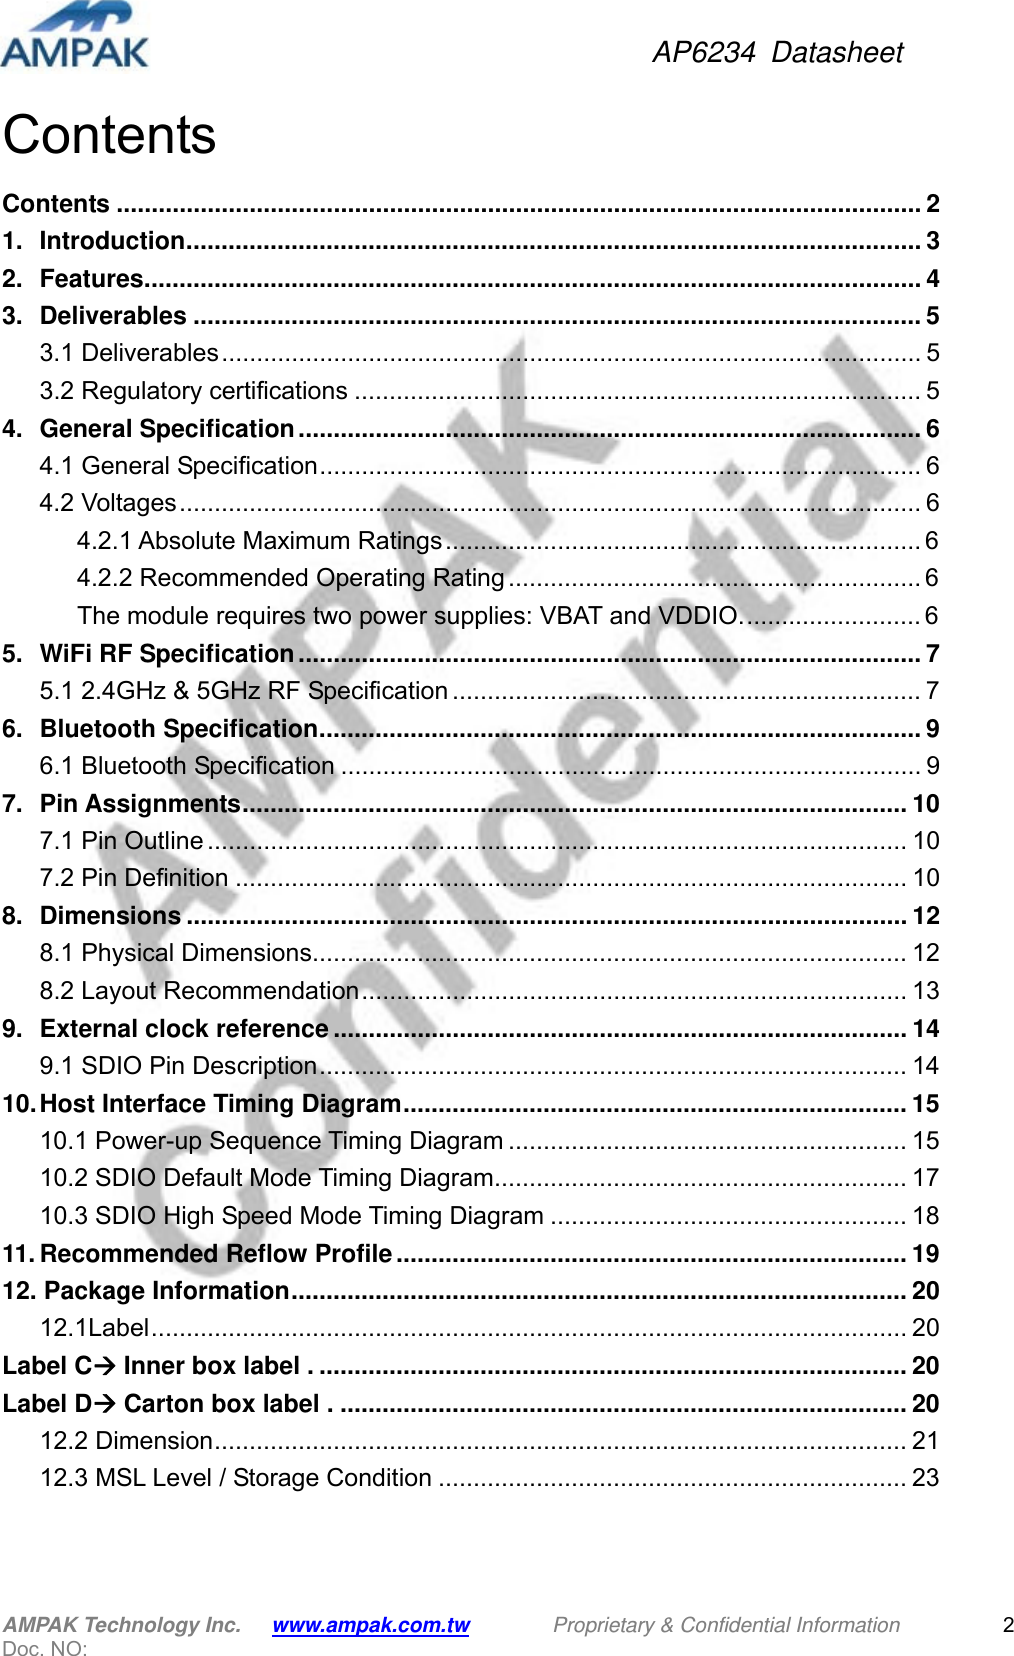 AP6234 Datasheet AMPAK Technology Inc.      www.ampak.com.tw        Proprietary &amp; Confidential Information       Doc. NO:   2ContentsContents ................................................................................................................... 21.Introduction ......................................................................................................... 32.Features ............................................................................................................... 43.Deliverables ........................................................................................................ 53.1 Deliverables .................................................................................................... 53.2 Regulatory certifications ................................................................................. 54.General Specification ......................................................................................... 64.1 General Specification ......................................................................................  64.2 Voltages .......................................................................................................... 64.2.1 Absolute Maximum Ratings .................................................................... 64.2.2 Recommended Operating Rating ........................................................... 6The module requires two power supplies: VBAT and VDDIO. ......................... 65.WiFi RF Specification ......................................................................................... 75.1 2.4GHz &amp; 5GHz RF Specification ................................................................... 76.Bluetooth Specification ...................................................................................... 96.1 Bluetooth Specification ................................................................................... 97.Pin Assignments ...............................................................................................  107.1 Pin Outline .................................................................................................... 107.2 Pin Definition ................................................................................................ 108.Dimensions ....................................................................................................... 128.1 Physical Dimensions..................................................................................... 128.2 Layout Recommendation ..............................................................................  139.External clock reference .................................................................................. 149.1 SDIO Pin Description ....................................................................................  1410.Host Interface Timing Diagram ........................................................................  1510.1 Power-up Sequence Timing Diagram ......................................................... 1510.2 SDIO Default Mode Timing Diagram........................................................... 1710.3 SDIO High Speed Mode Timing Diagram ................................................... 1811.Recommended Reflow Profile ......................................................................... 1912. Package Information ........................................................................................  2012.1Label ............................................................................................................ 20Label C Inner box label . .................................................................................... 20Label D Carton box label . ................................................................................. 2012.2 Dimension ................................................................................................... 2112.3 MSL Level / Storage Condition ................................................................... 23 